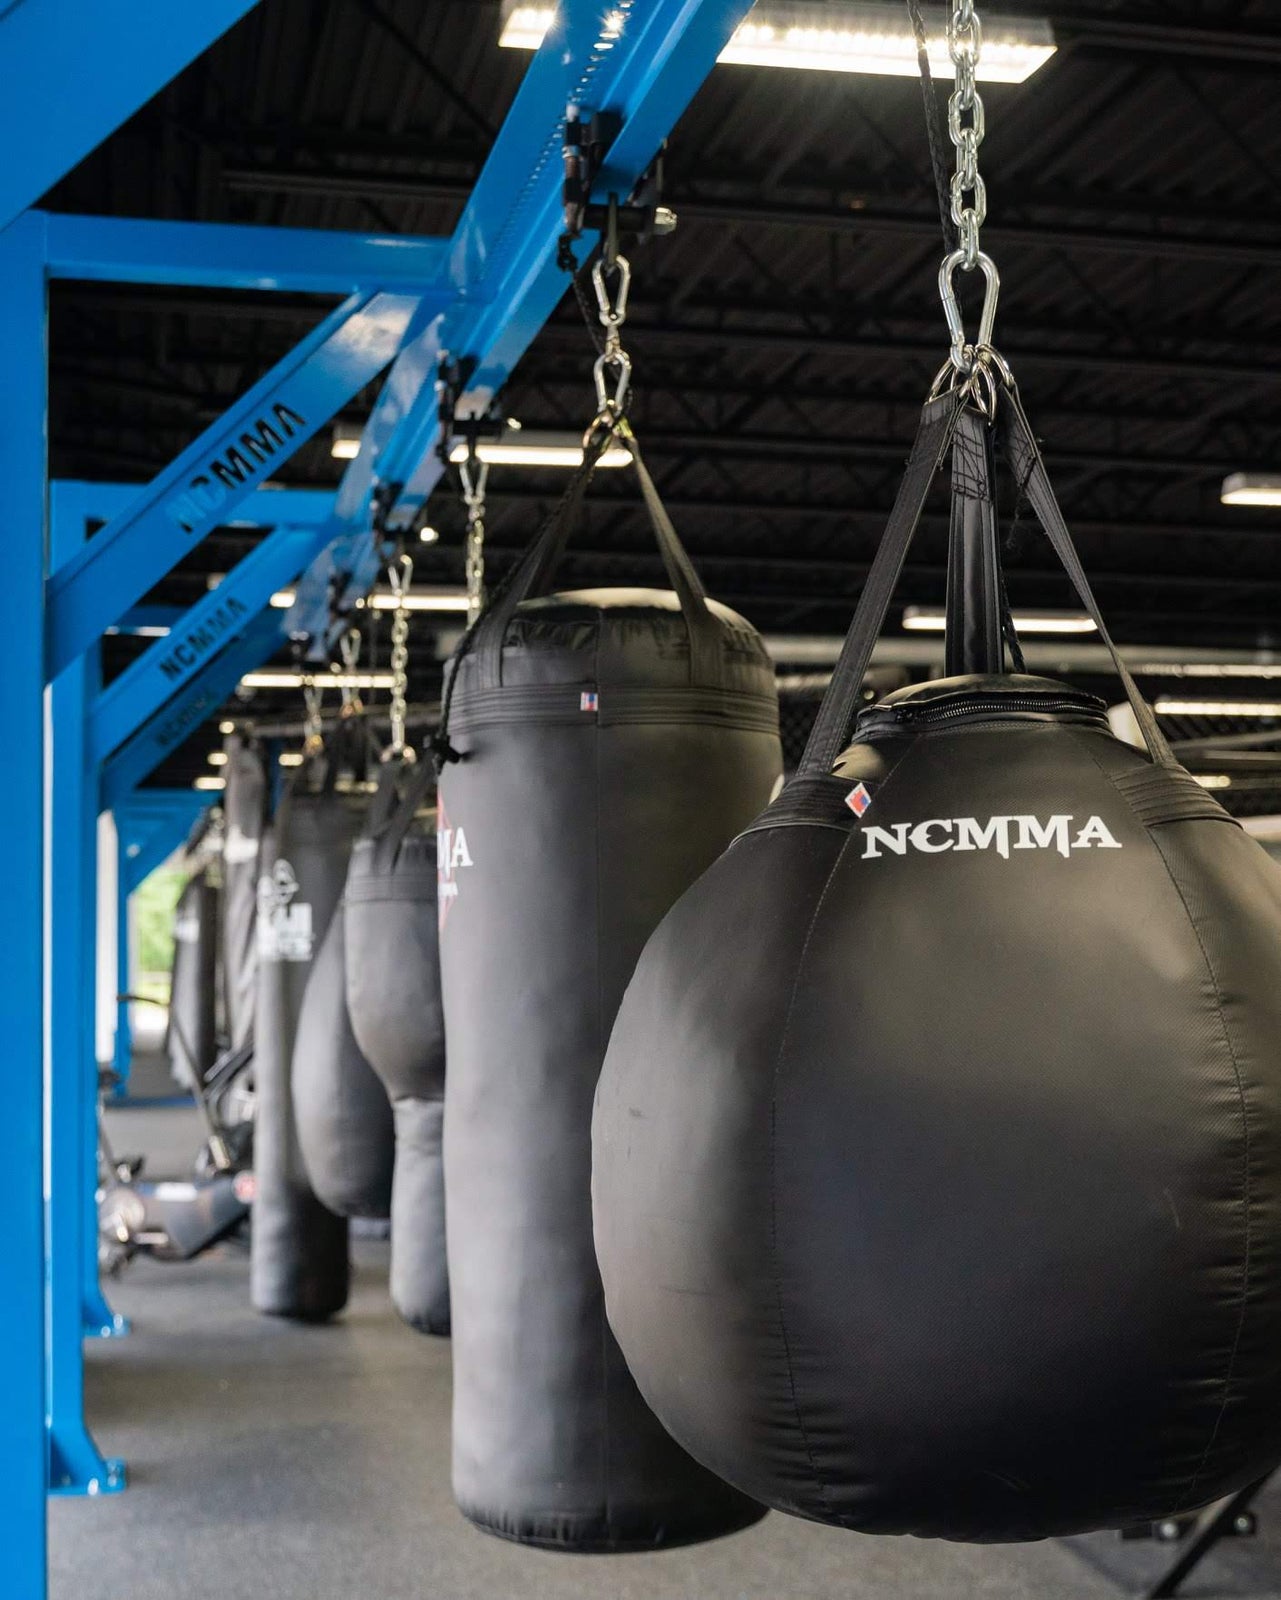 Punching Bag Workout to Build Stronger Arms & Core In A Fun Way – DMoose